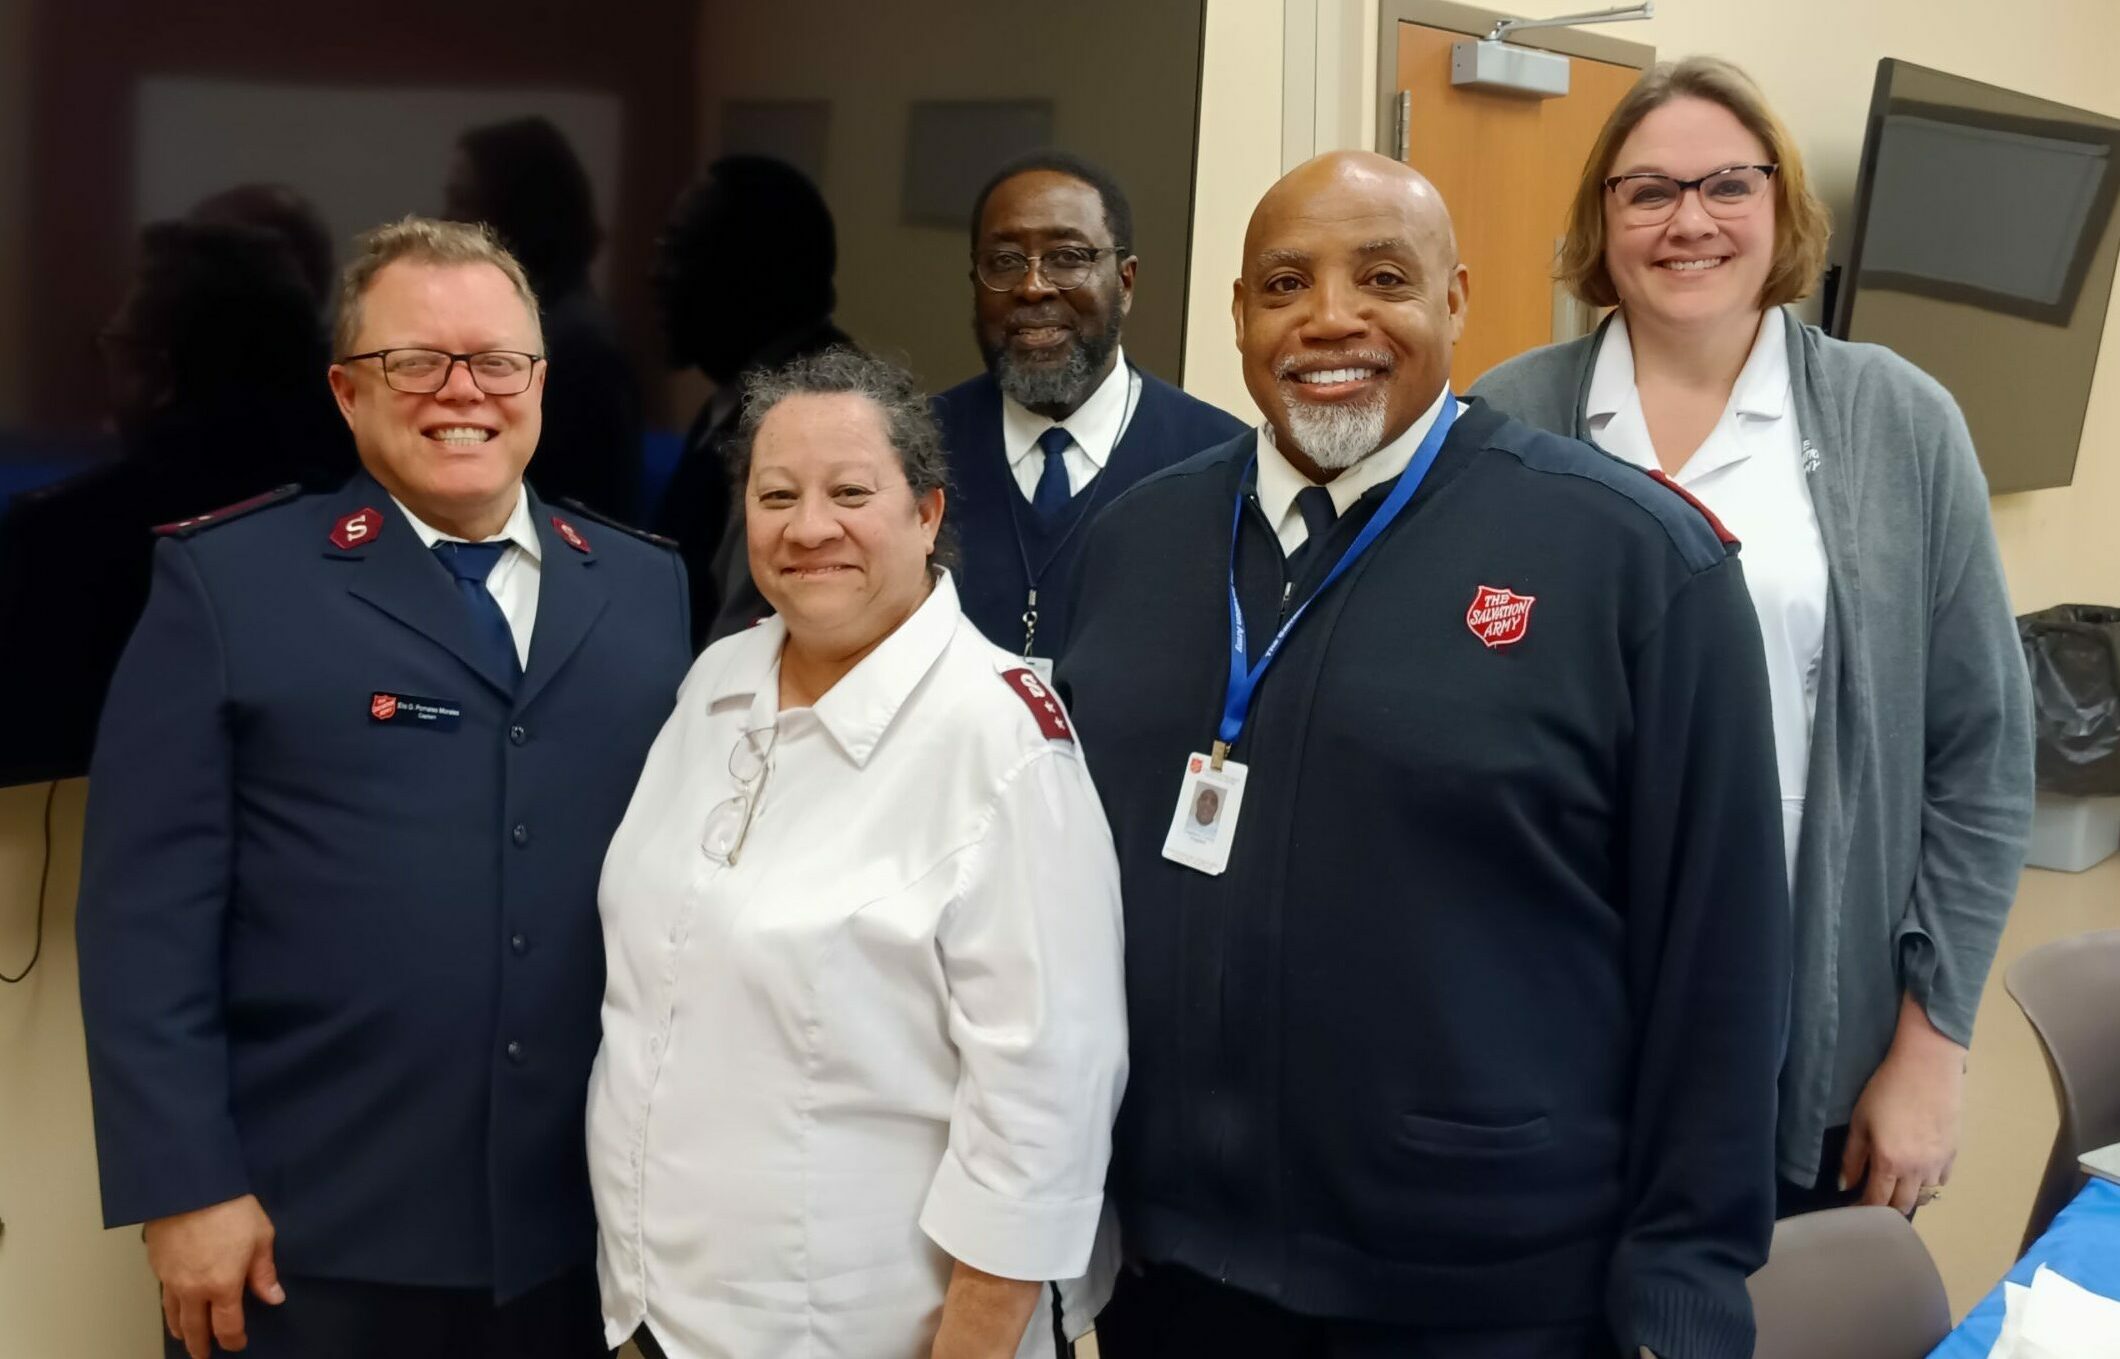 Chicago Freedom Center officers. Left to Right: Captain Elis Pomales-Morales, Captain Ada Diaz Fajardo, Envoy Tyrone Staggers, Captains Corey and Nikki Hughes.